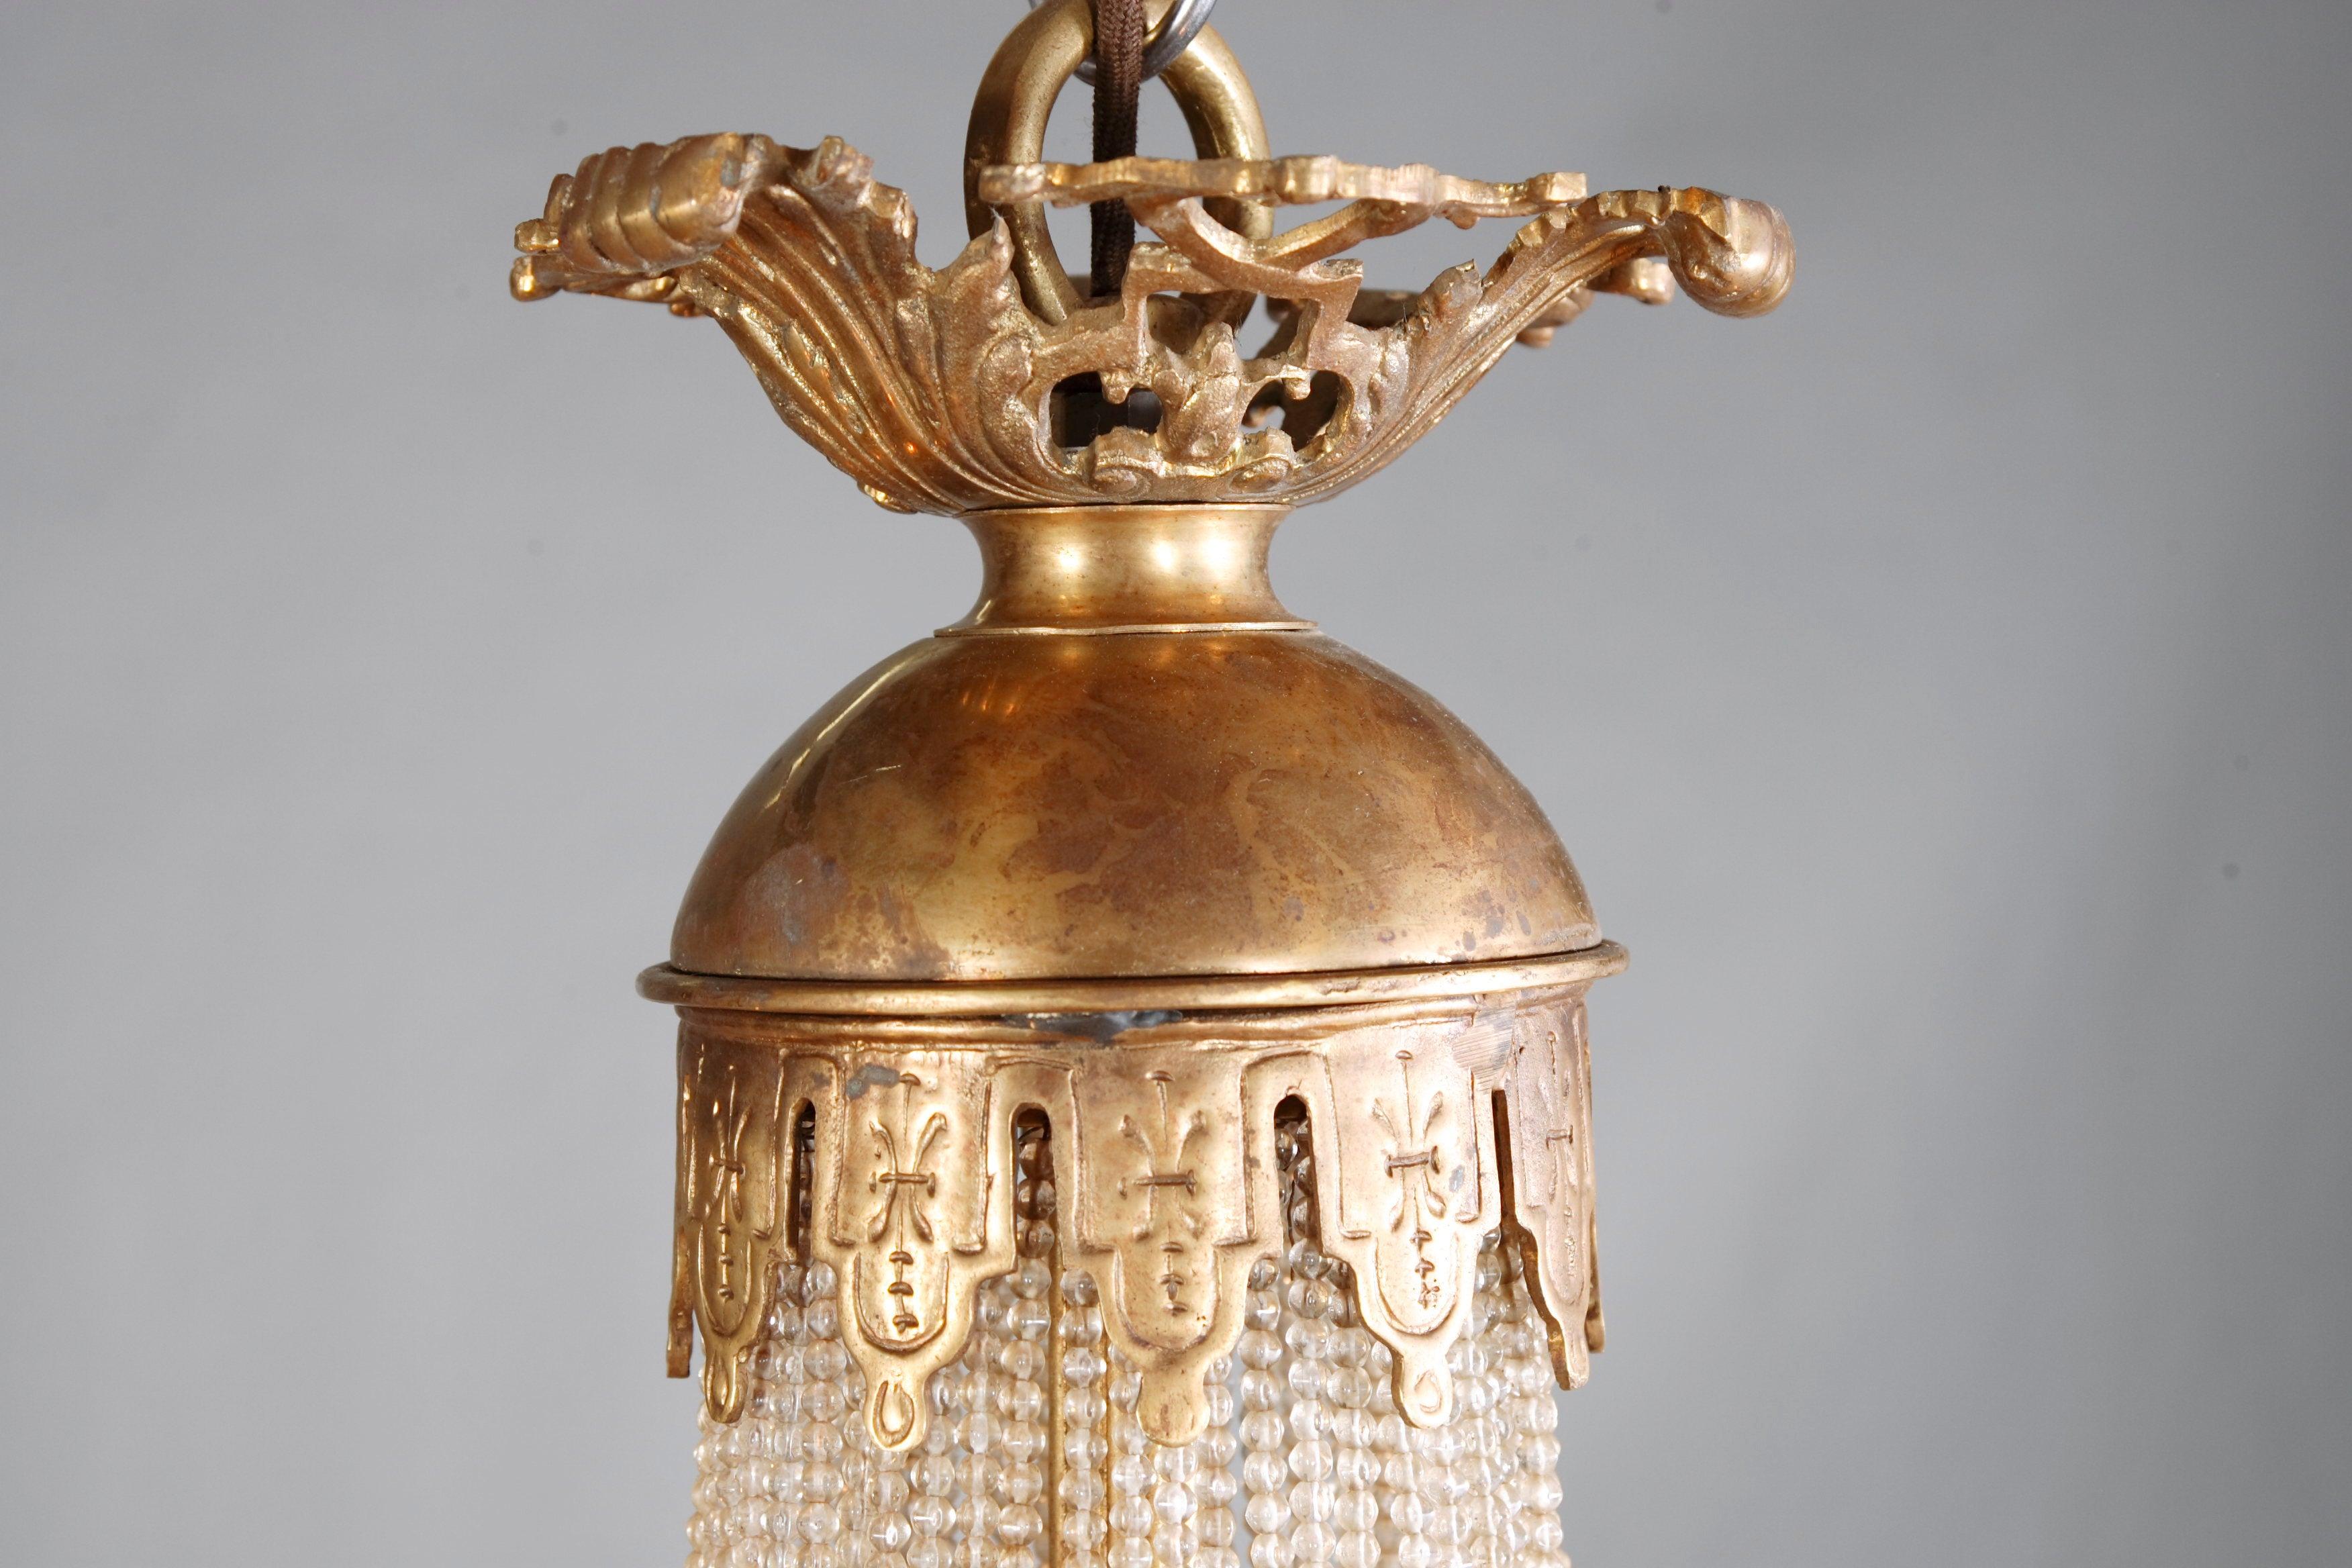 Majestic splendid chandelier in Empire style referred to Empress Joséphine. Exceptionally cine, engraved and cast bronze. Basket-formed corpus from handcut Frenches ball prisms. Connected through wide, mythological ornamental reliefed and broken